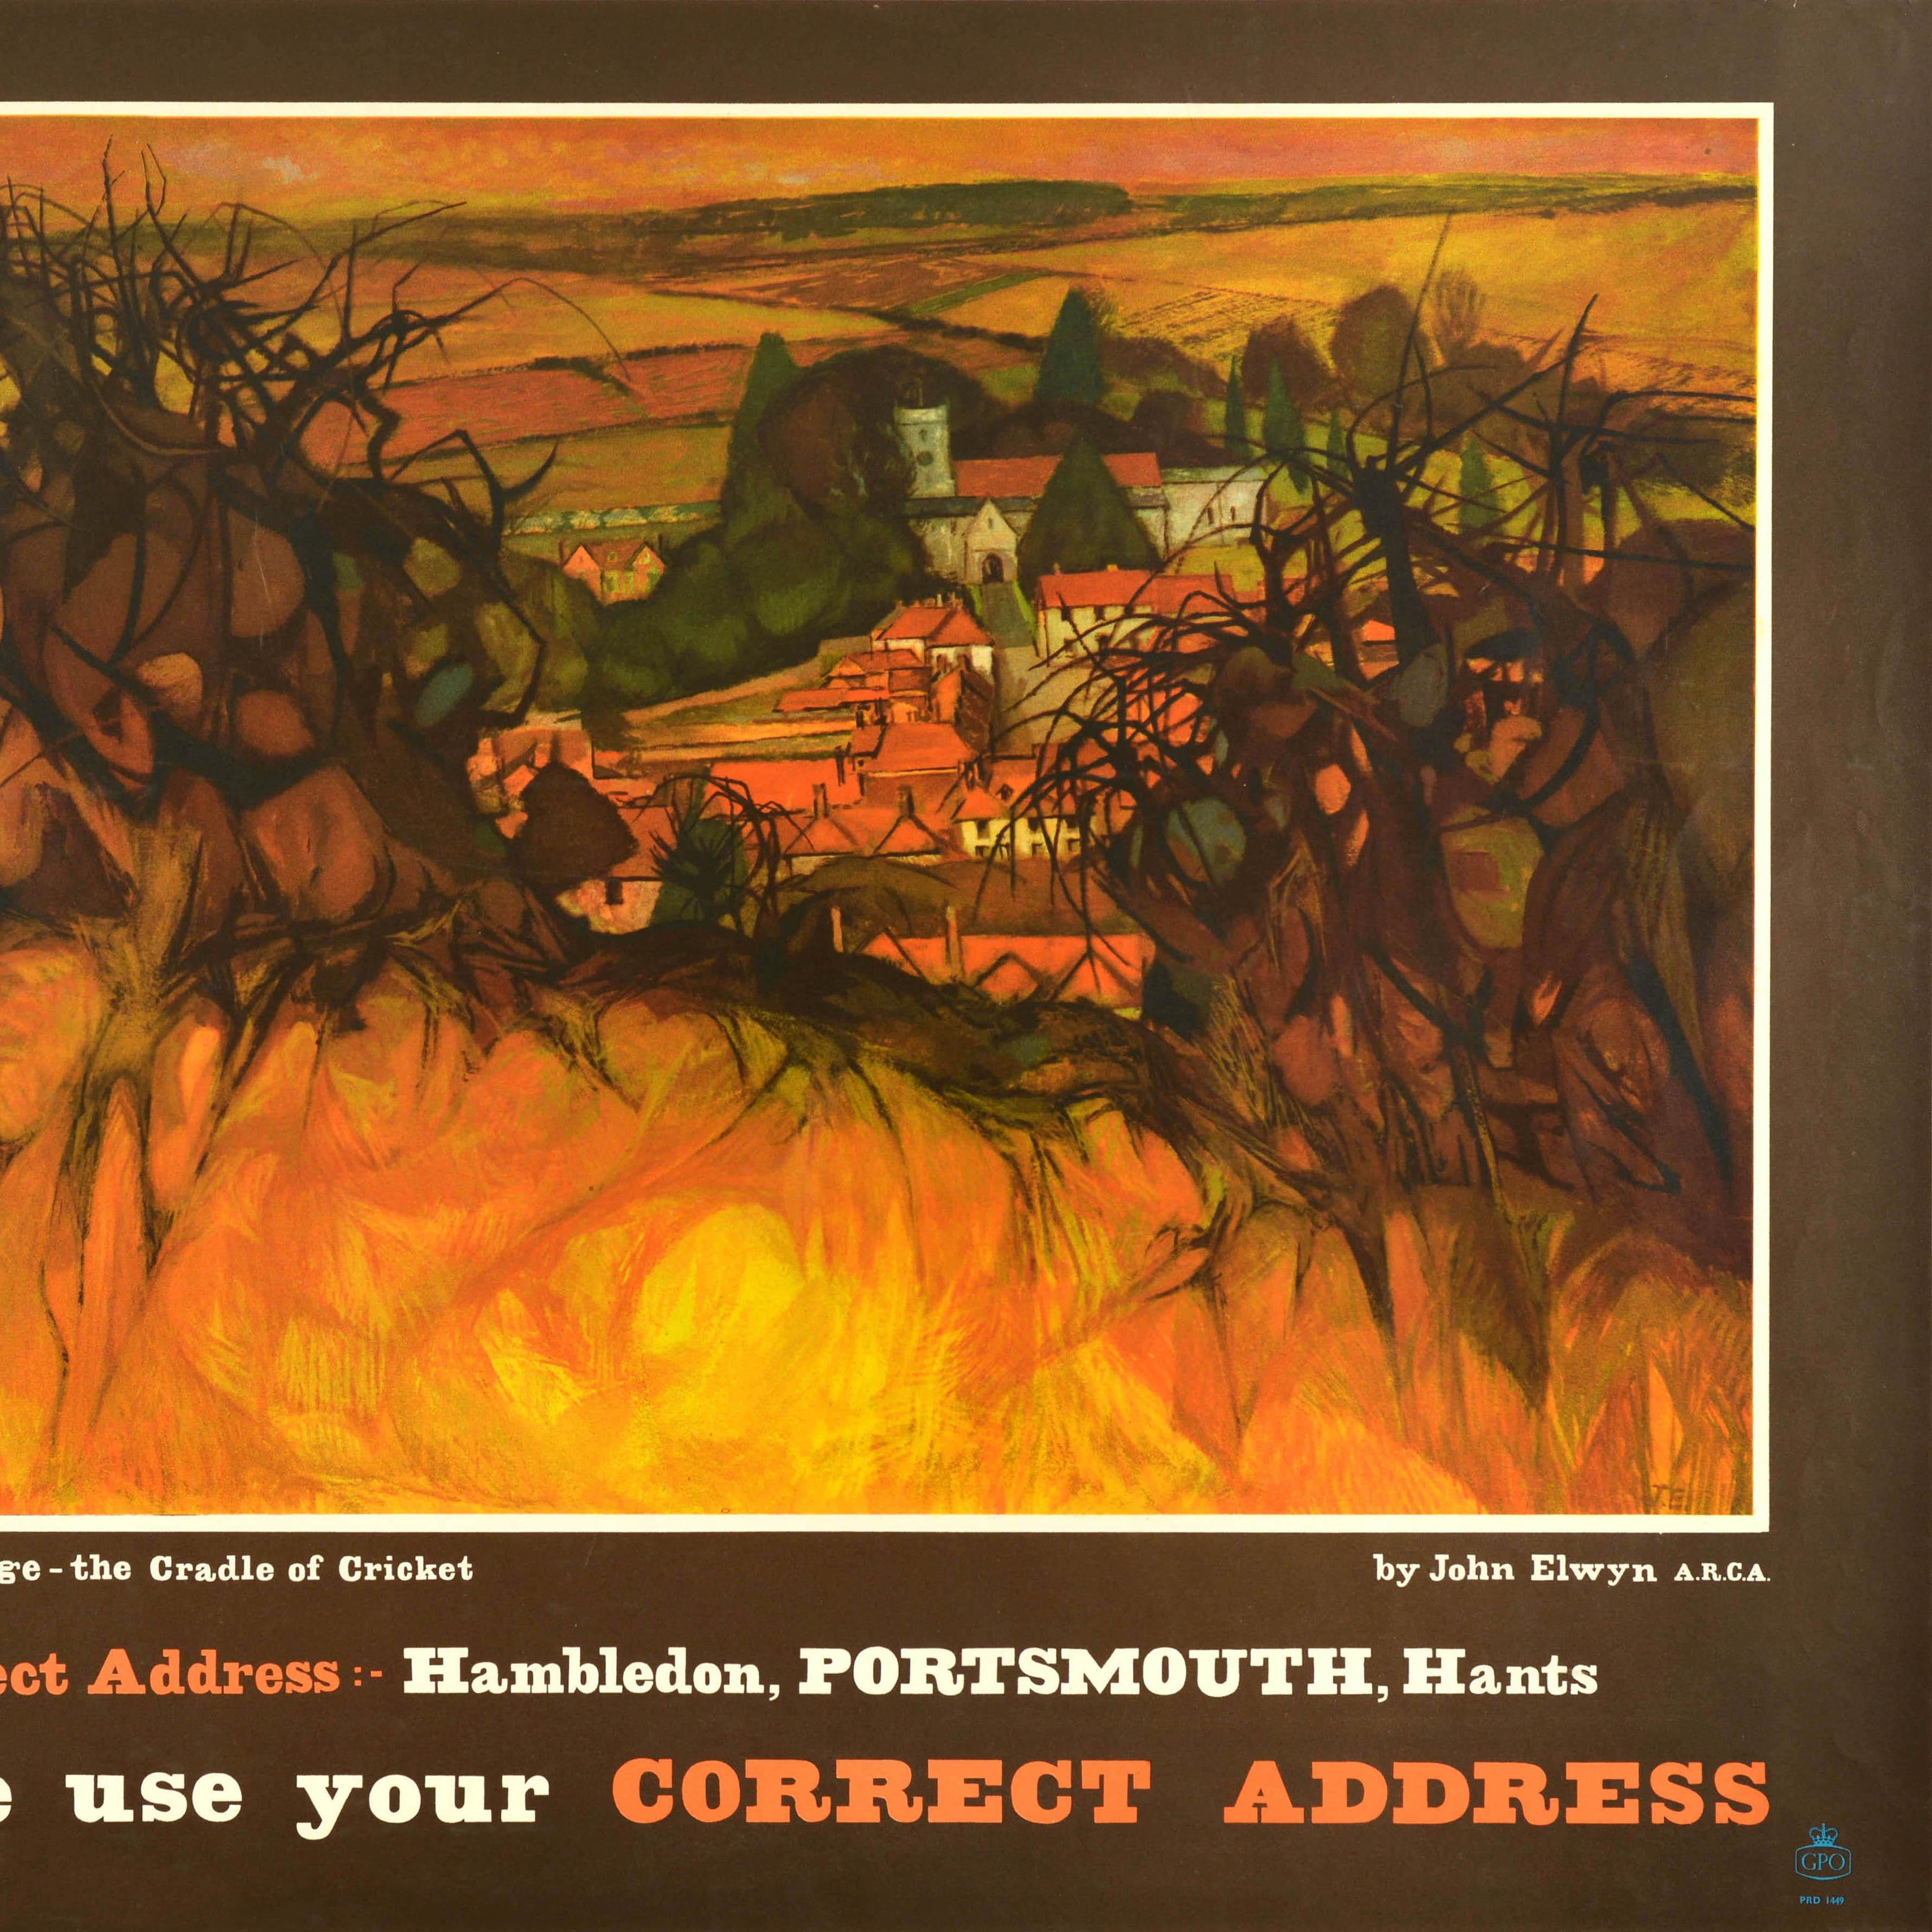 Original vintage General Post Office advertising poster - Hambledon Village the Cradle of Cricket Correct Address: Hambledon, Portsmouth, Hants Please use your Correct Address - featuring artwork by John Elwyn (1916-1997) depicting a view of the